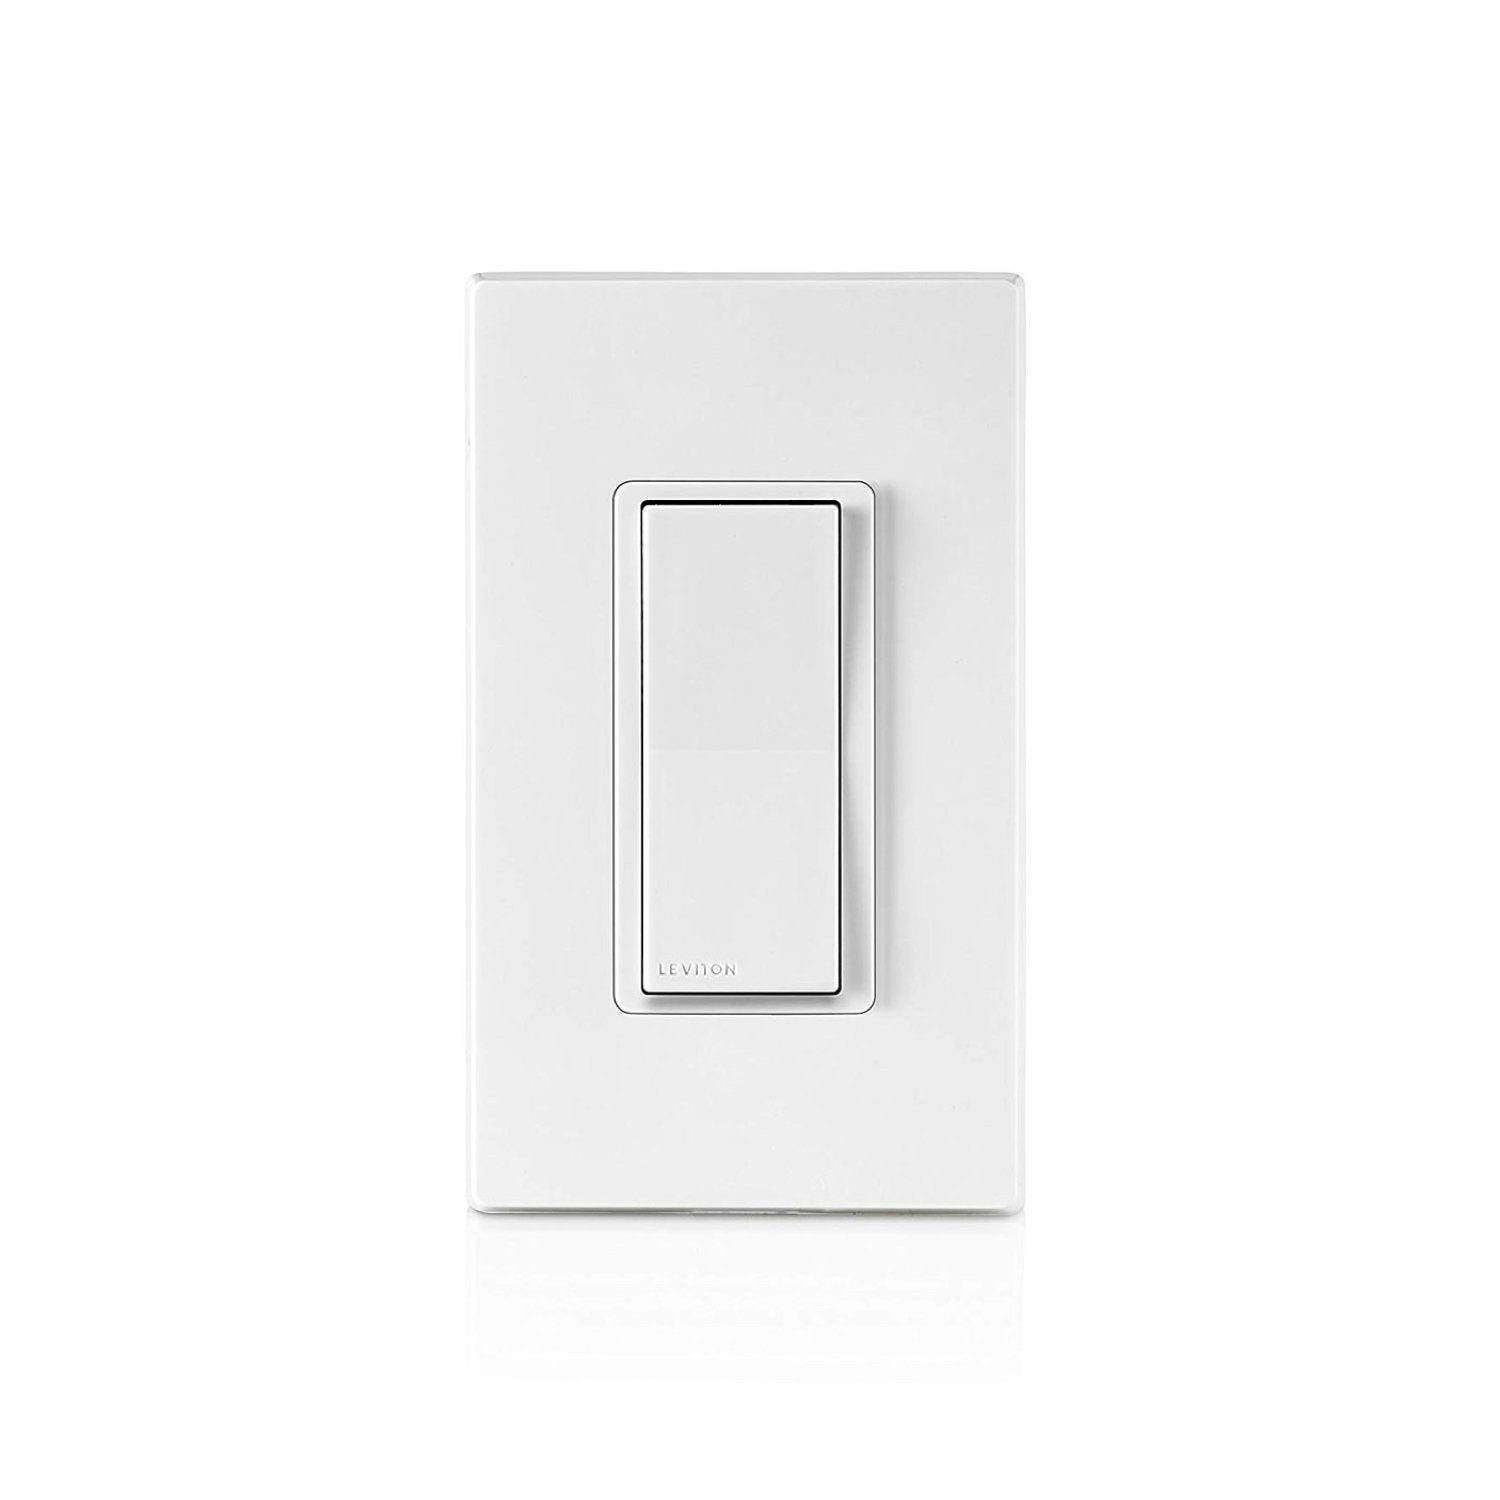 Leviton Decora Smart In-Wall Switch (for Works with Ring Alarm Security System) - White